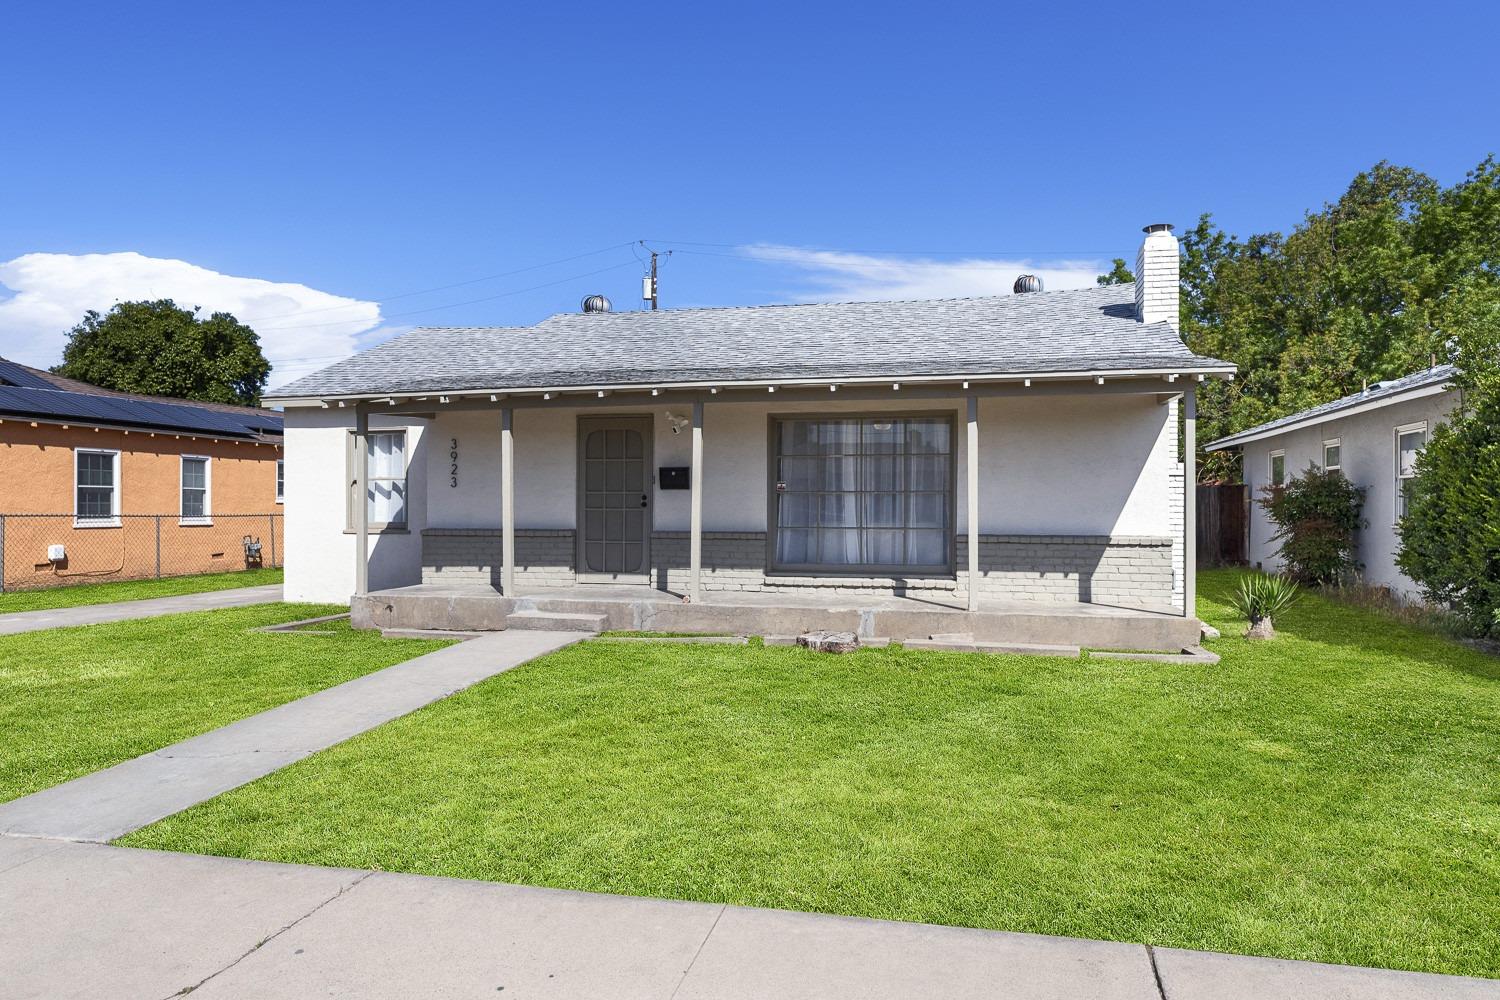 Photo of 3923 Maywood Dr in Fresno, CA